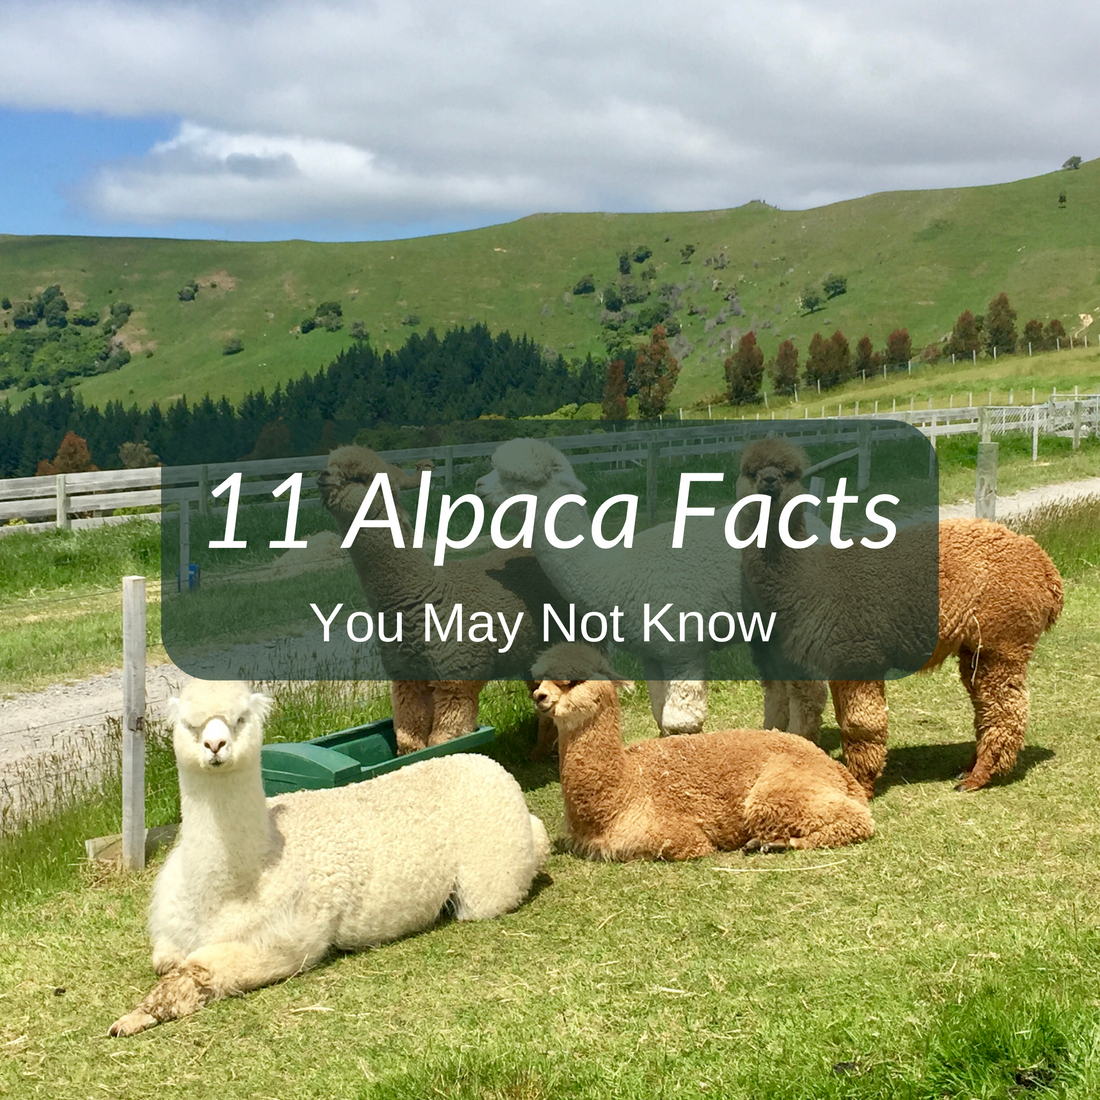 11 Alpaca Facts You May Not Know